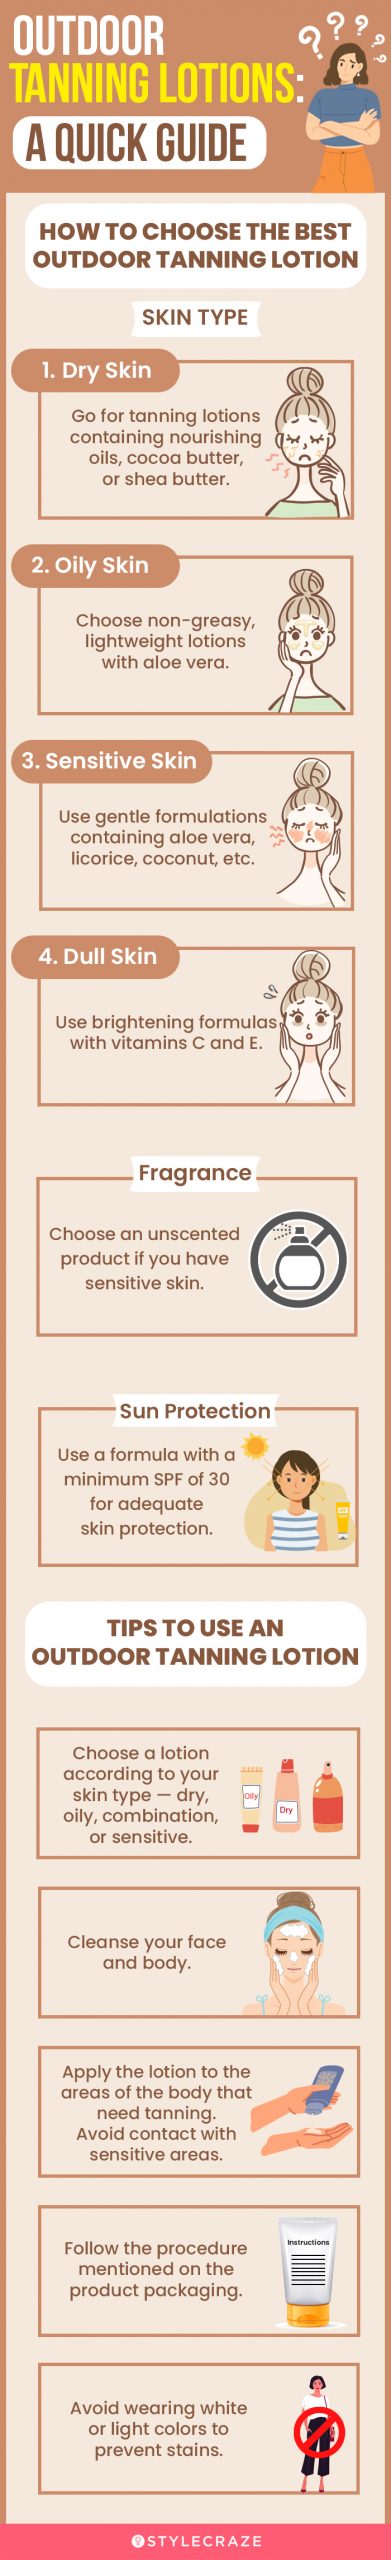 How To Choose The Best Outdoor Tanning Lotion (infographic)